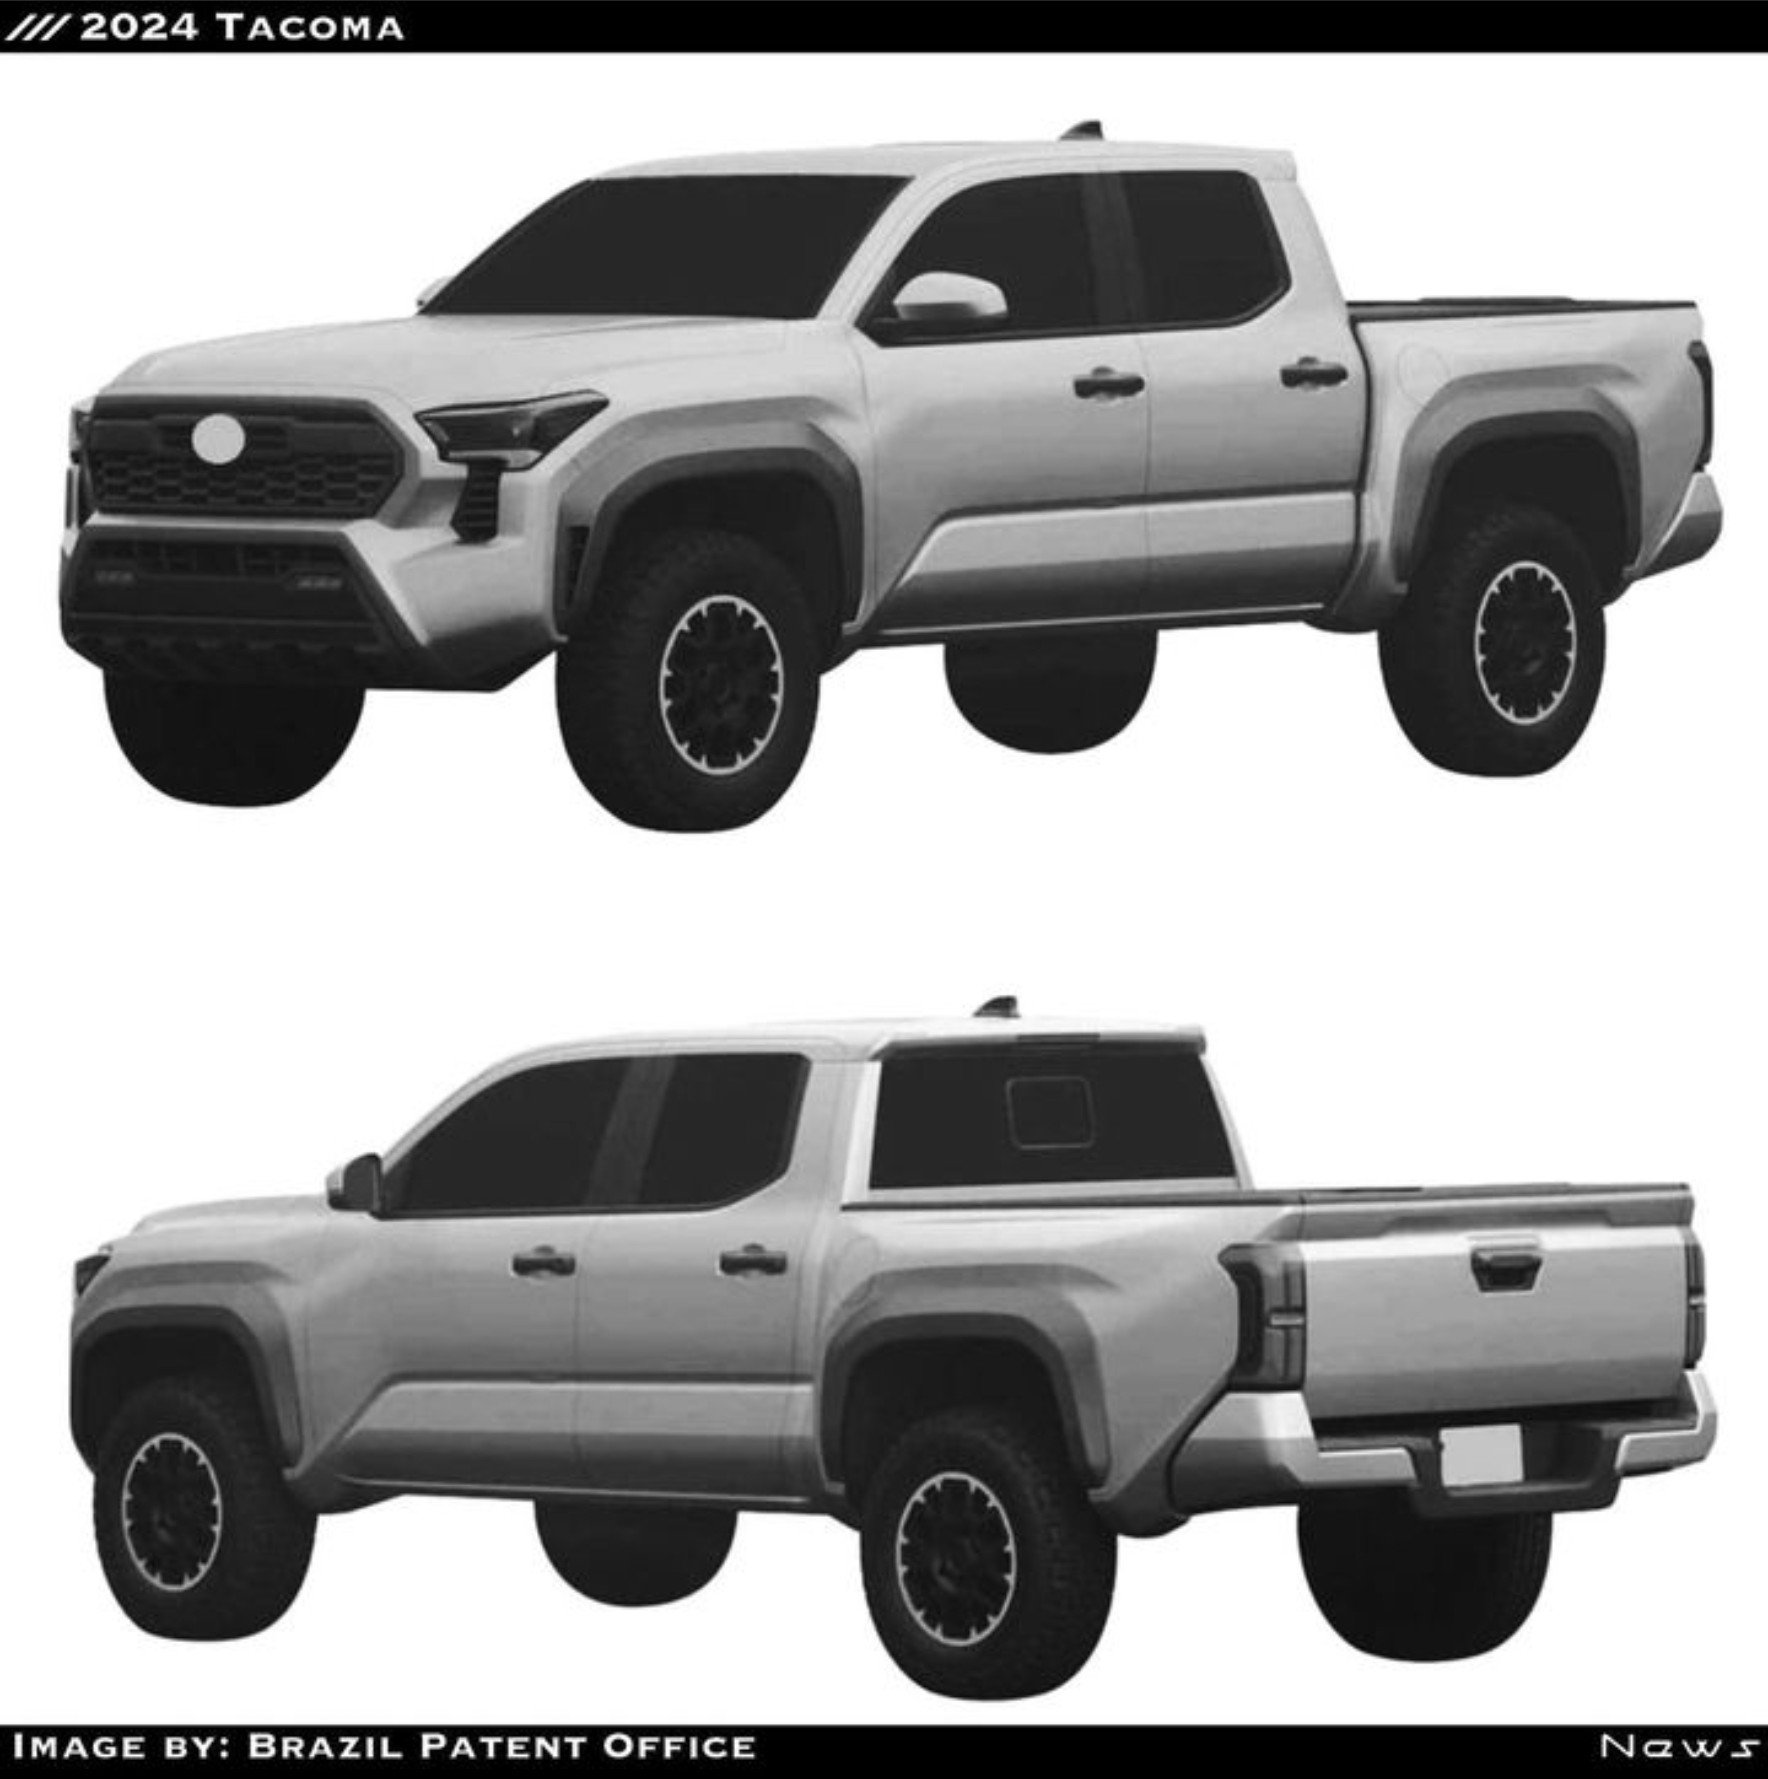 2024 Tacoma Second 2024 Tacoma Teaser by Toyota! Hints at 4/4/23 Reveal 📸 screenshot_20230124_183731_instagram_86d79f8c13df5f5fb576b0389b45813a6aac7f41